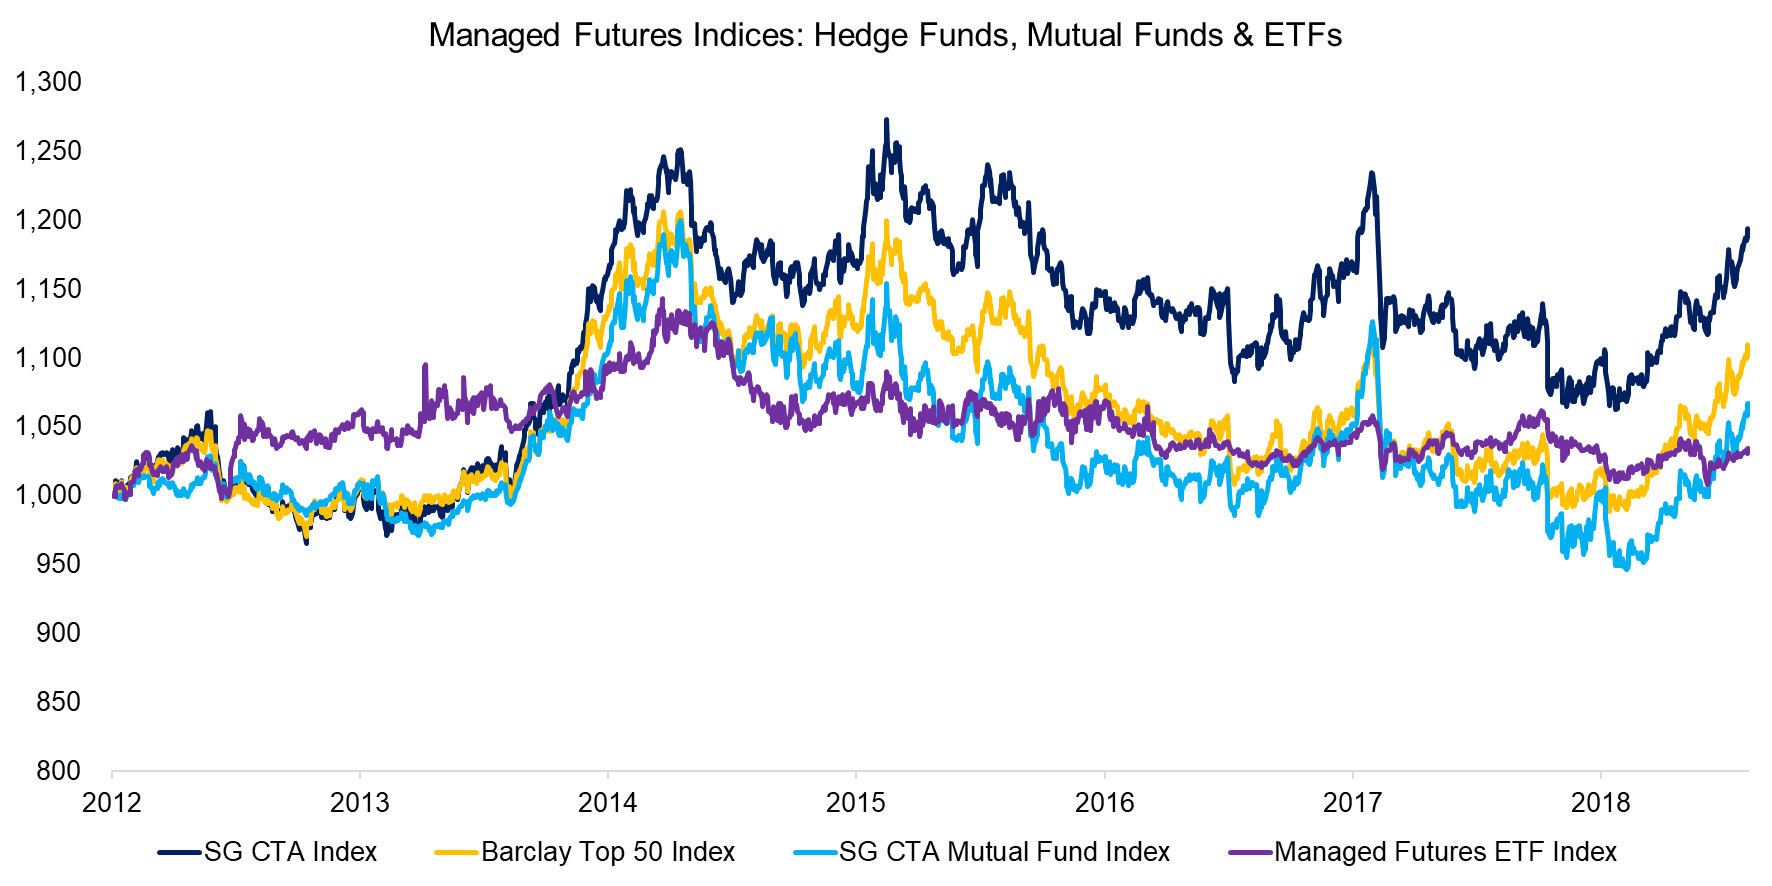 Managed Futures Indices Hedge Funds, Mutual Funds & ETFs